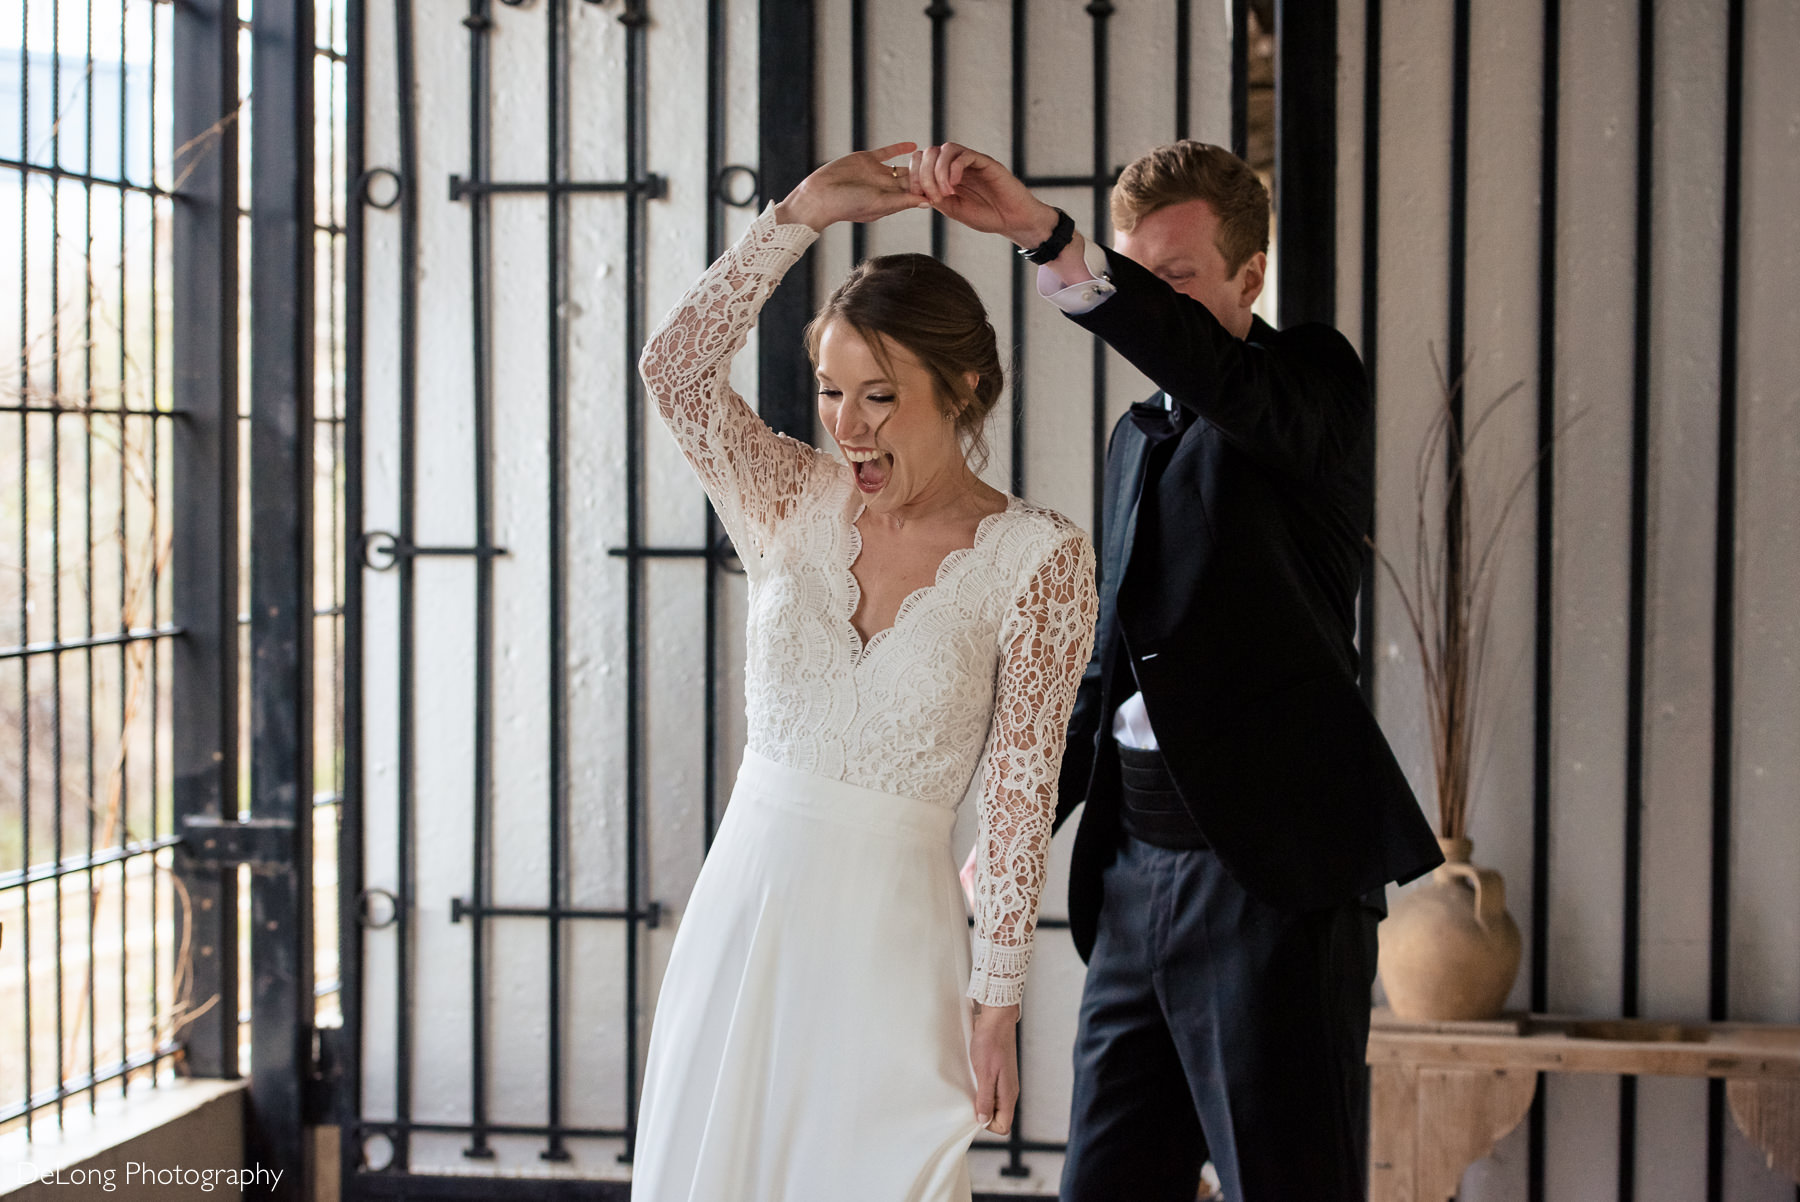 Groom twirling the bride during a first look at the Westside Warehouse in Atlanta by Charlotte wedding photographers DeLong Photography